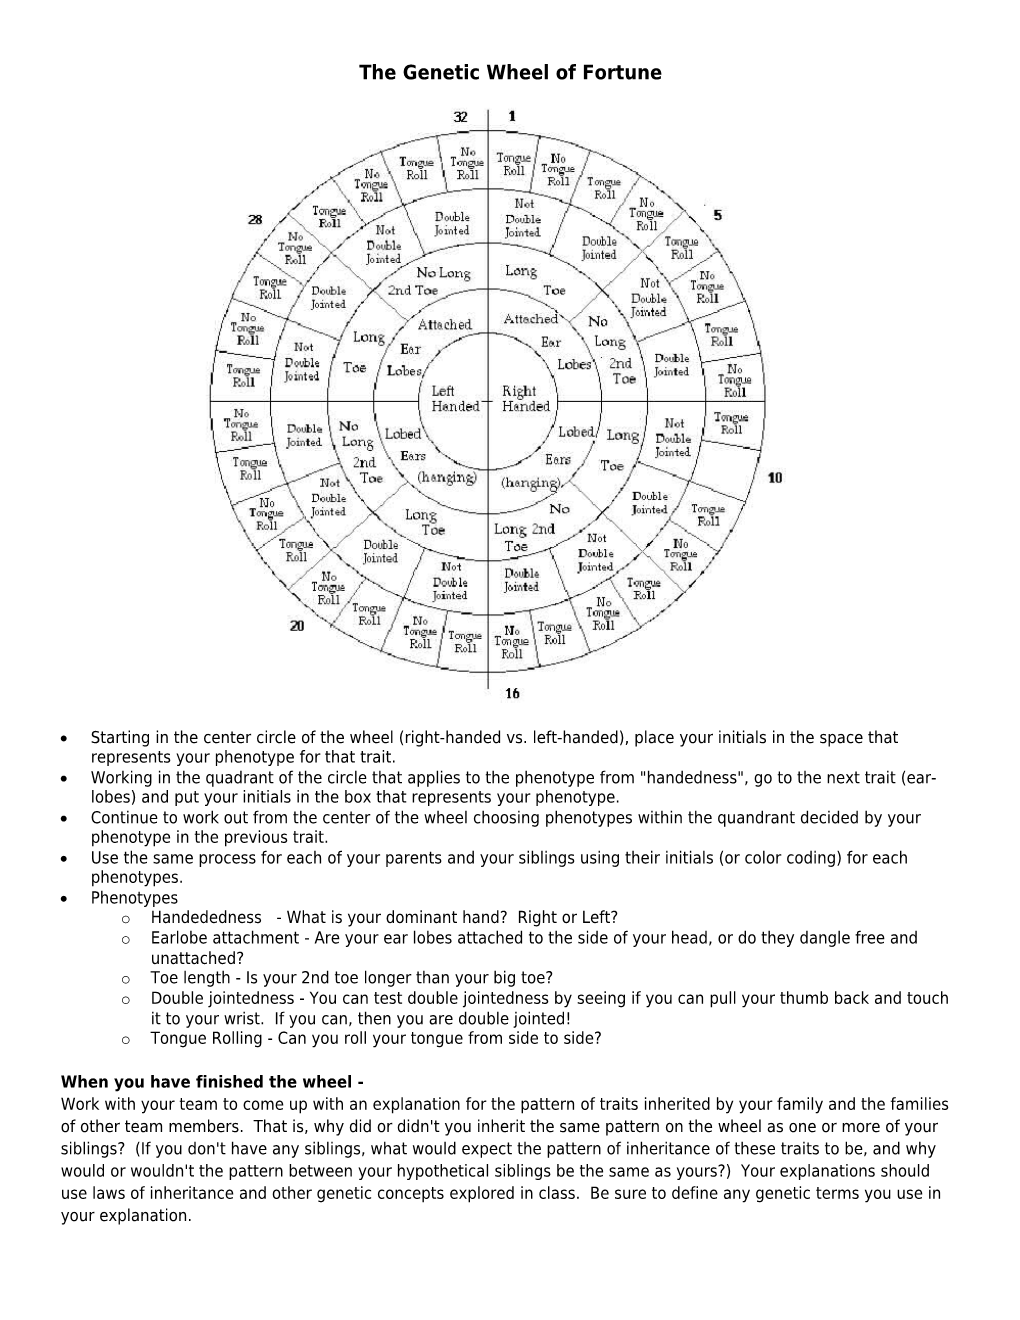 The Genetic Wheel of Fortune